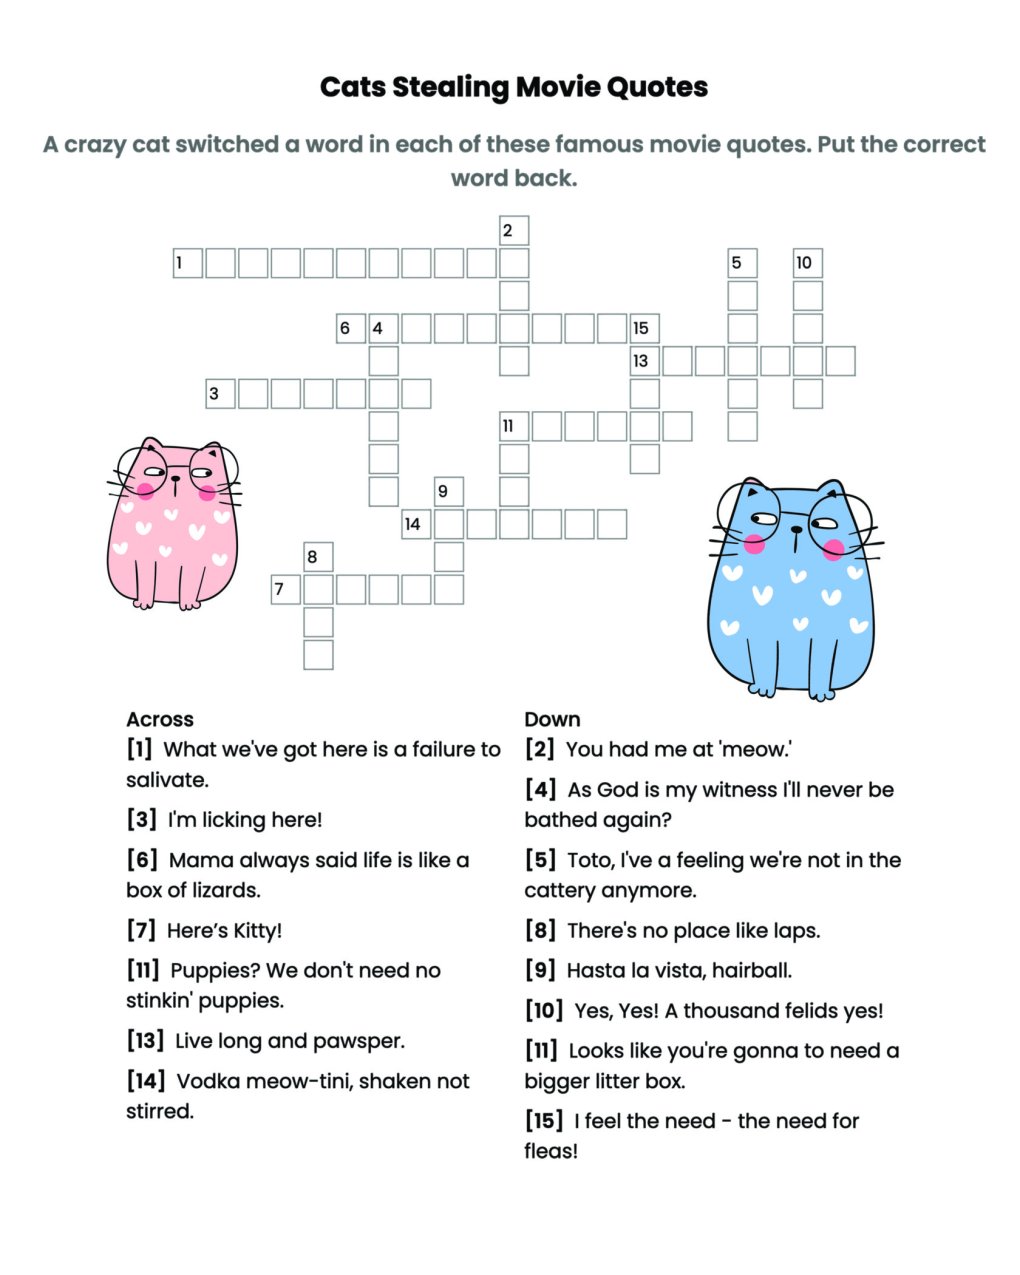 Weekly Cat Word Puzzle – Cats Stealing Movie Quotes